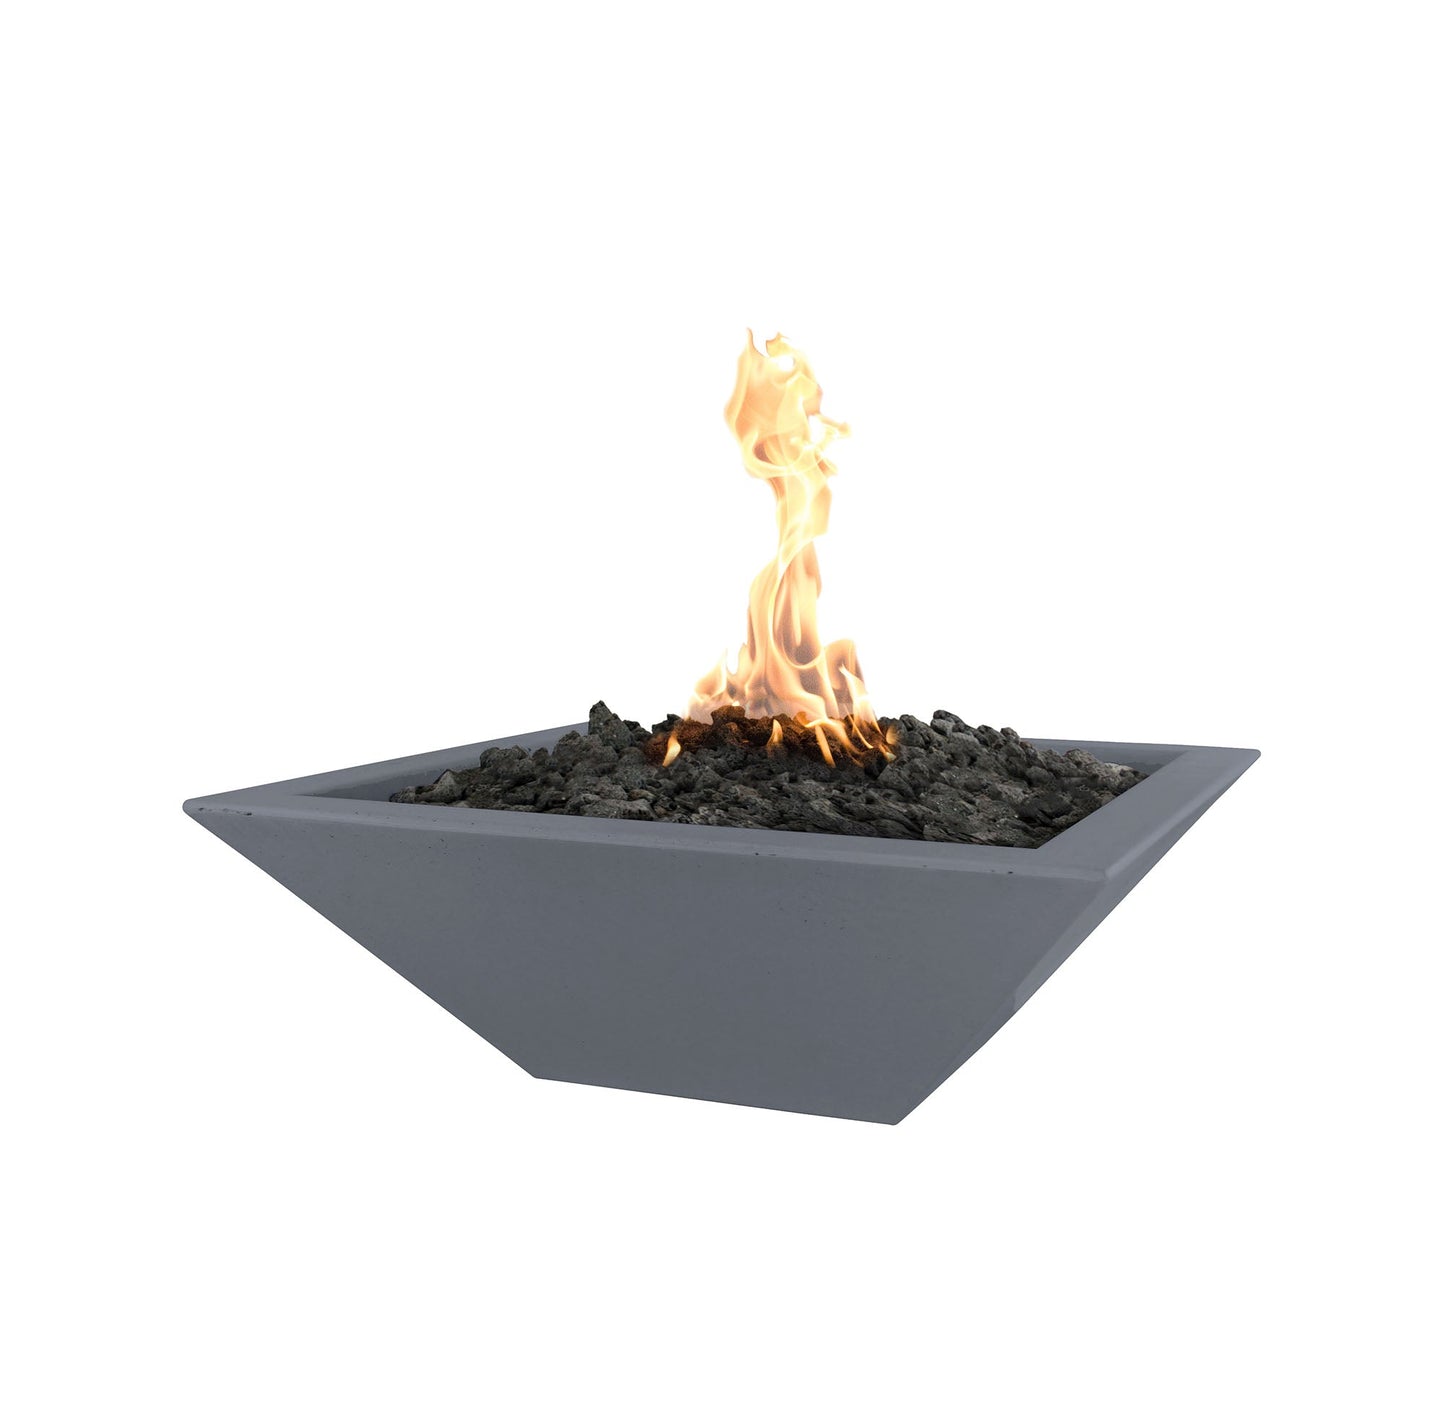 The Outdoor Plus Square Maya 24" Chocolate GFRC Concrete Liquid Propane Fire Bowl with Match Lit with Flame Sense Ignition